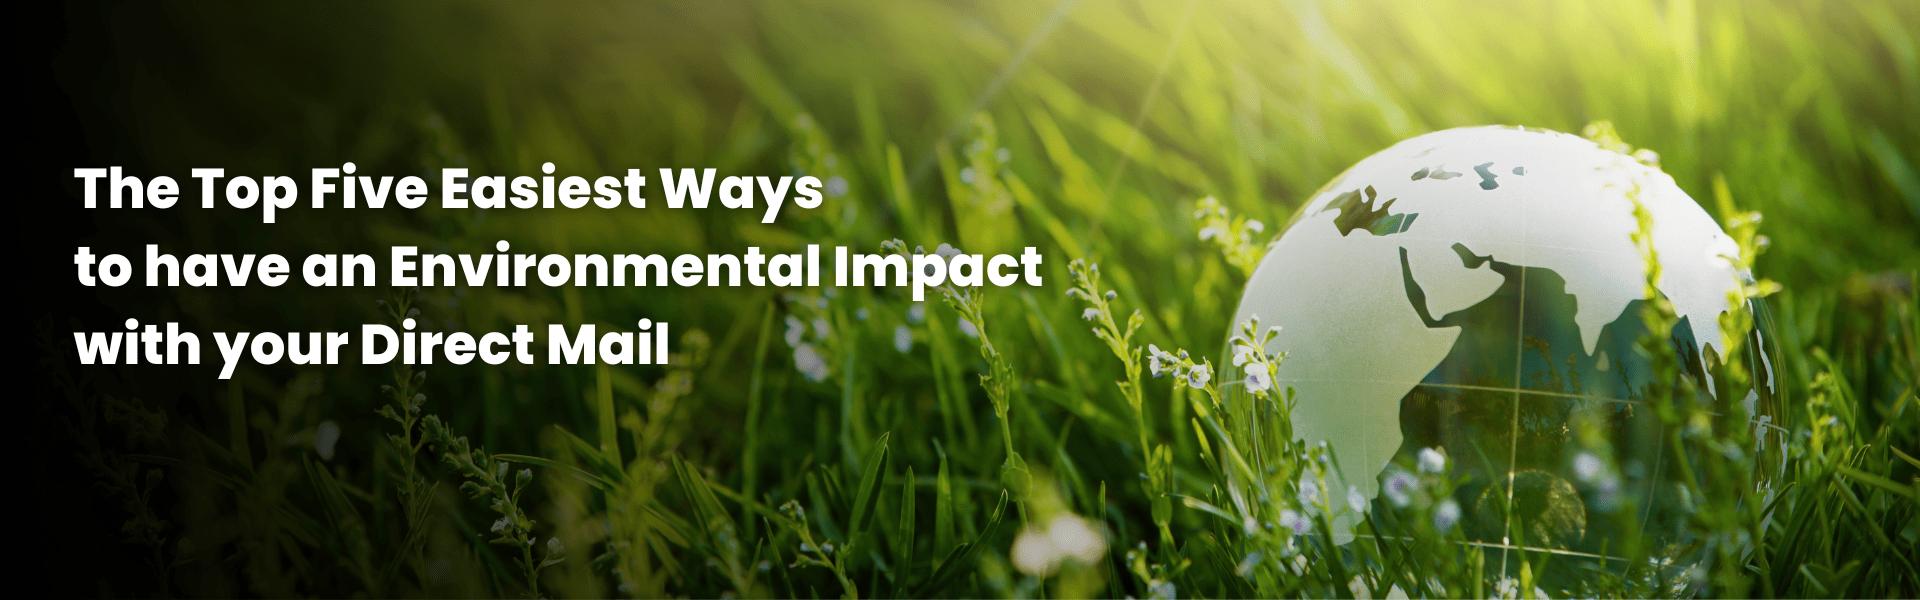 The Top Five ways to have an environmental impact with your direct mail